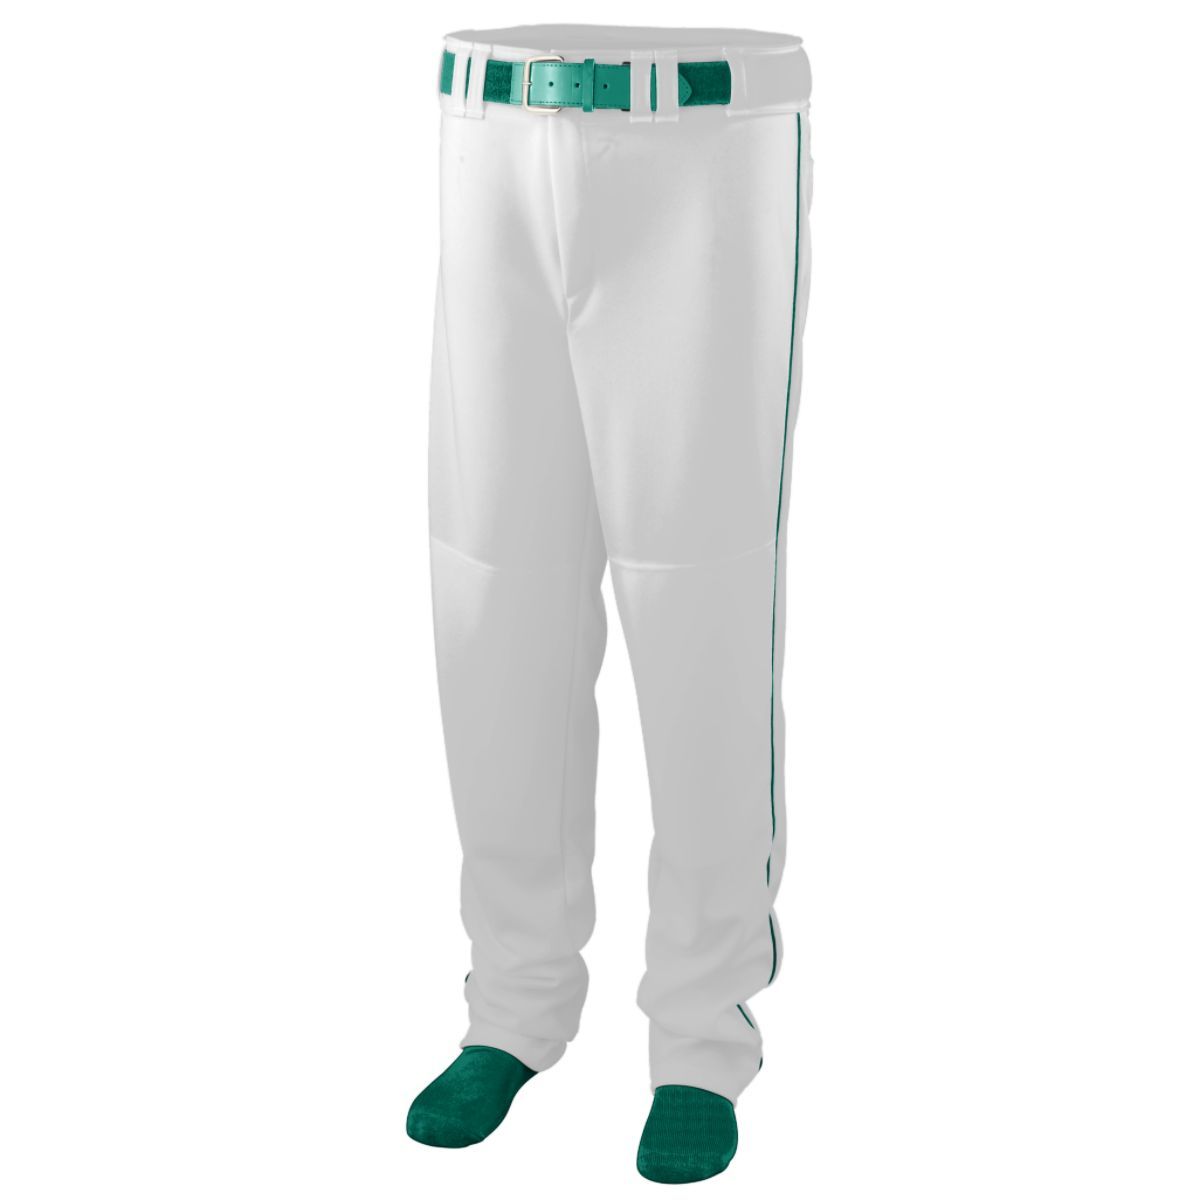 Augusta Sportswear Youth Series Baseball/Softball Pant With Piping in White/Dark Green  -Part of the Youth, Youth-Pants, Pants, Augusta-Products, Baseball, All-Sports, All-Sports-1 product lines at KanaleyCreations.com